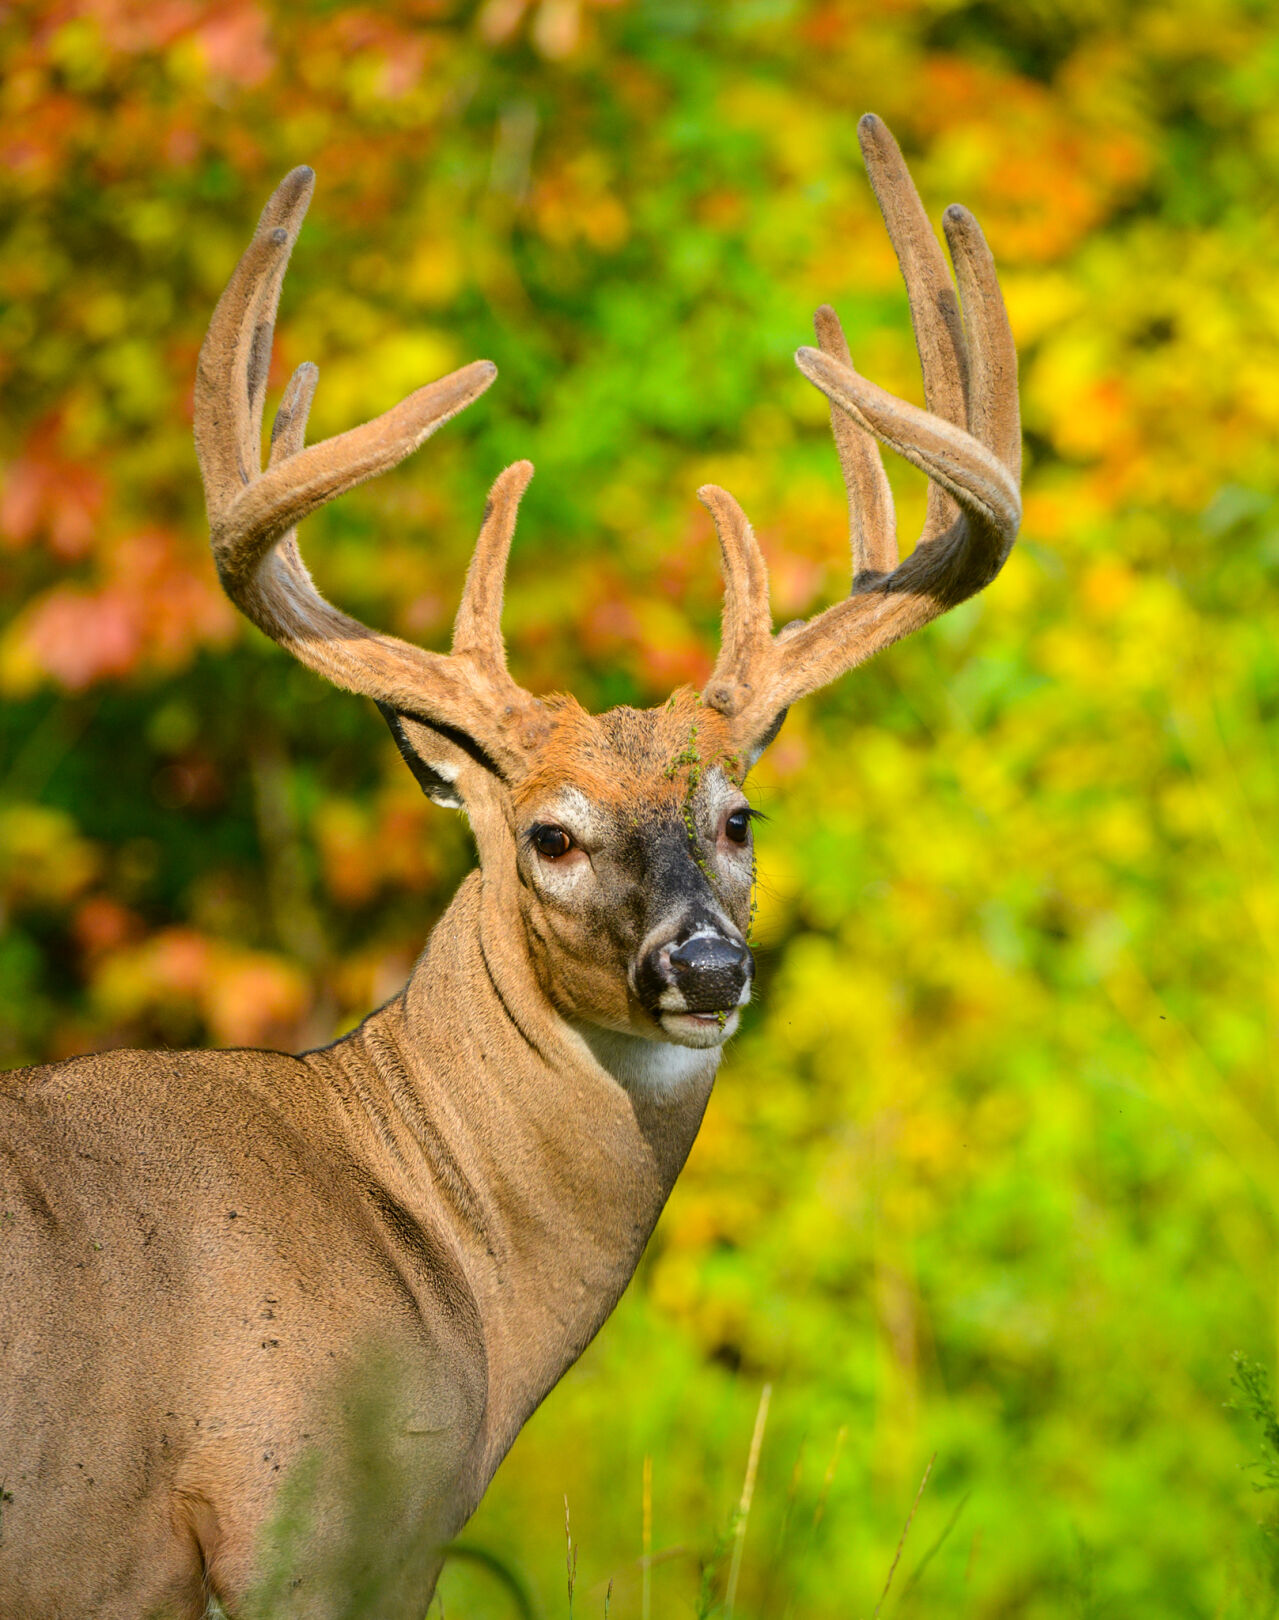 Morrison Summer can provide great whitetail viewing opportunities Local Sports mankatofreepress